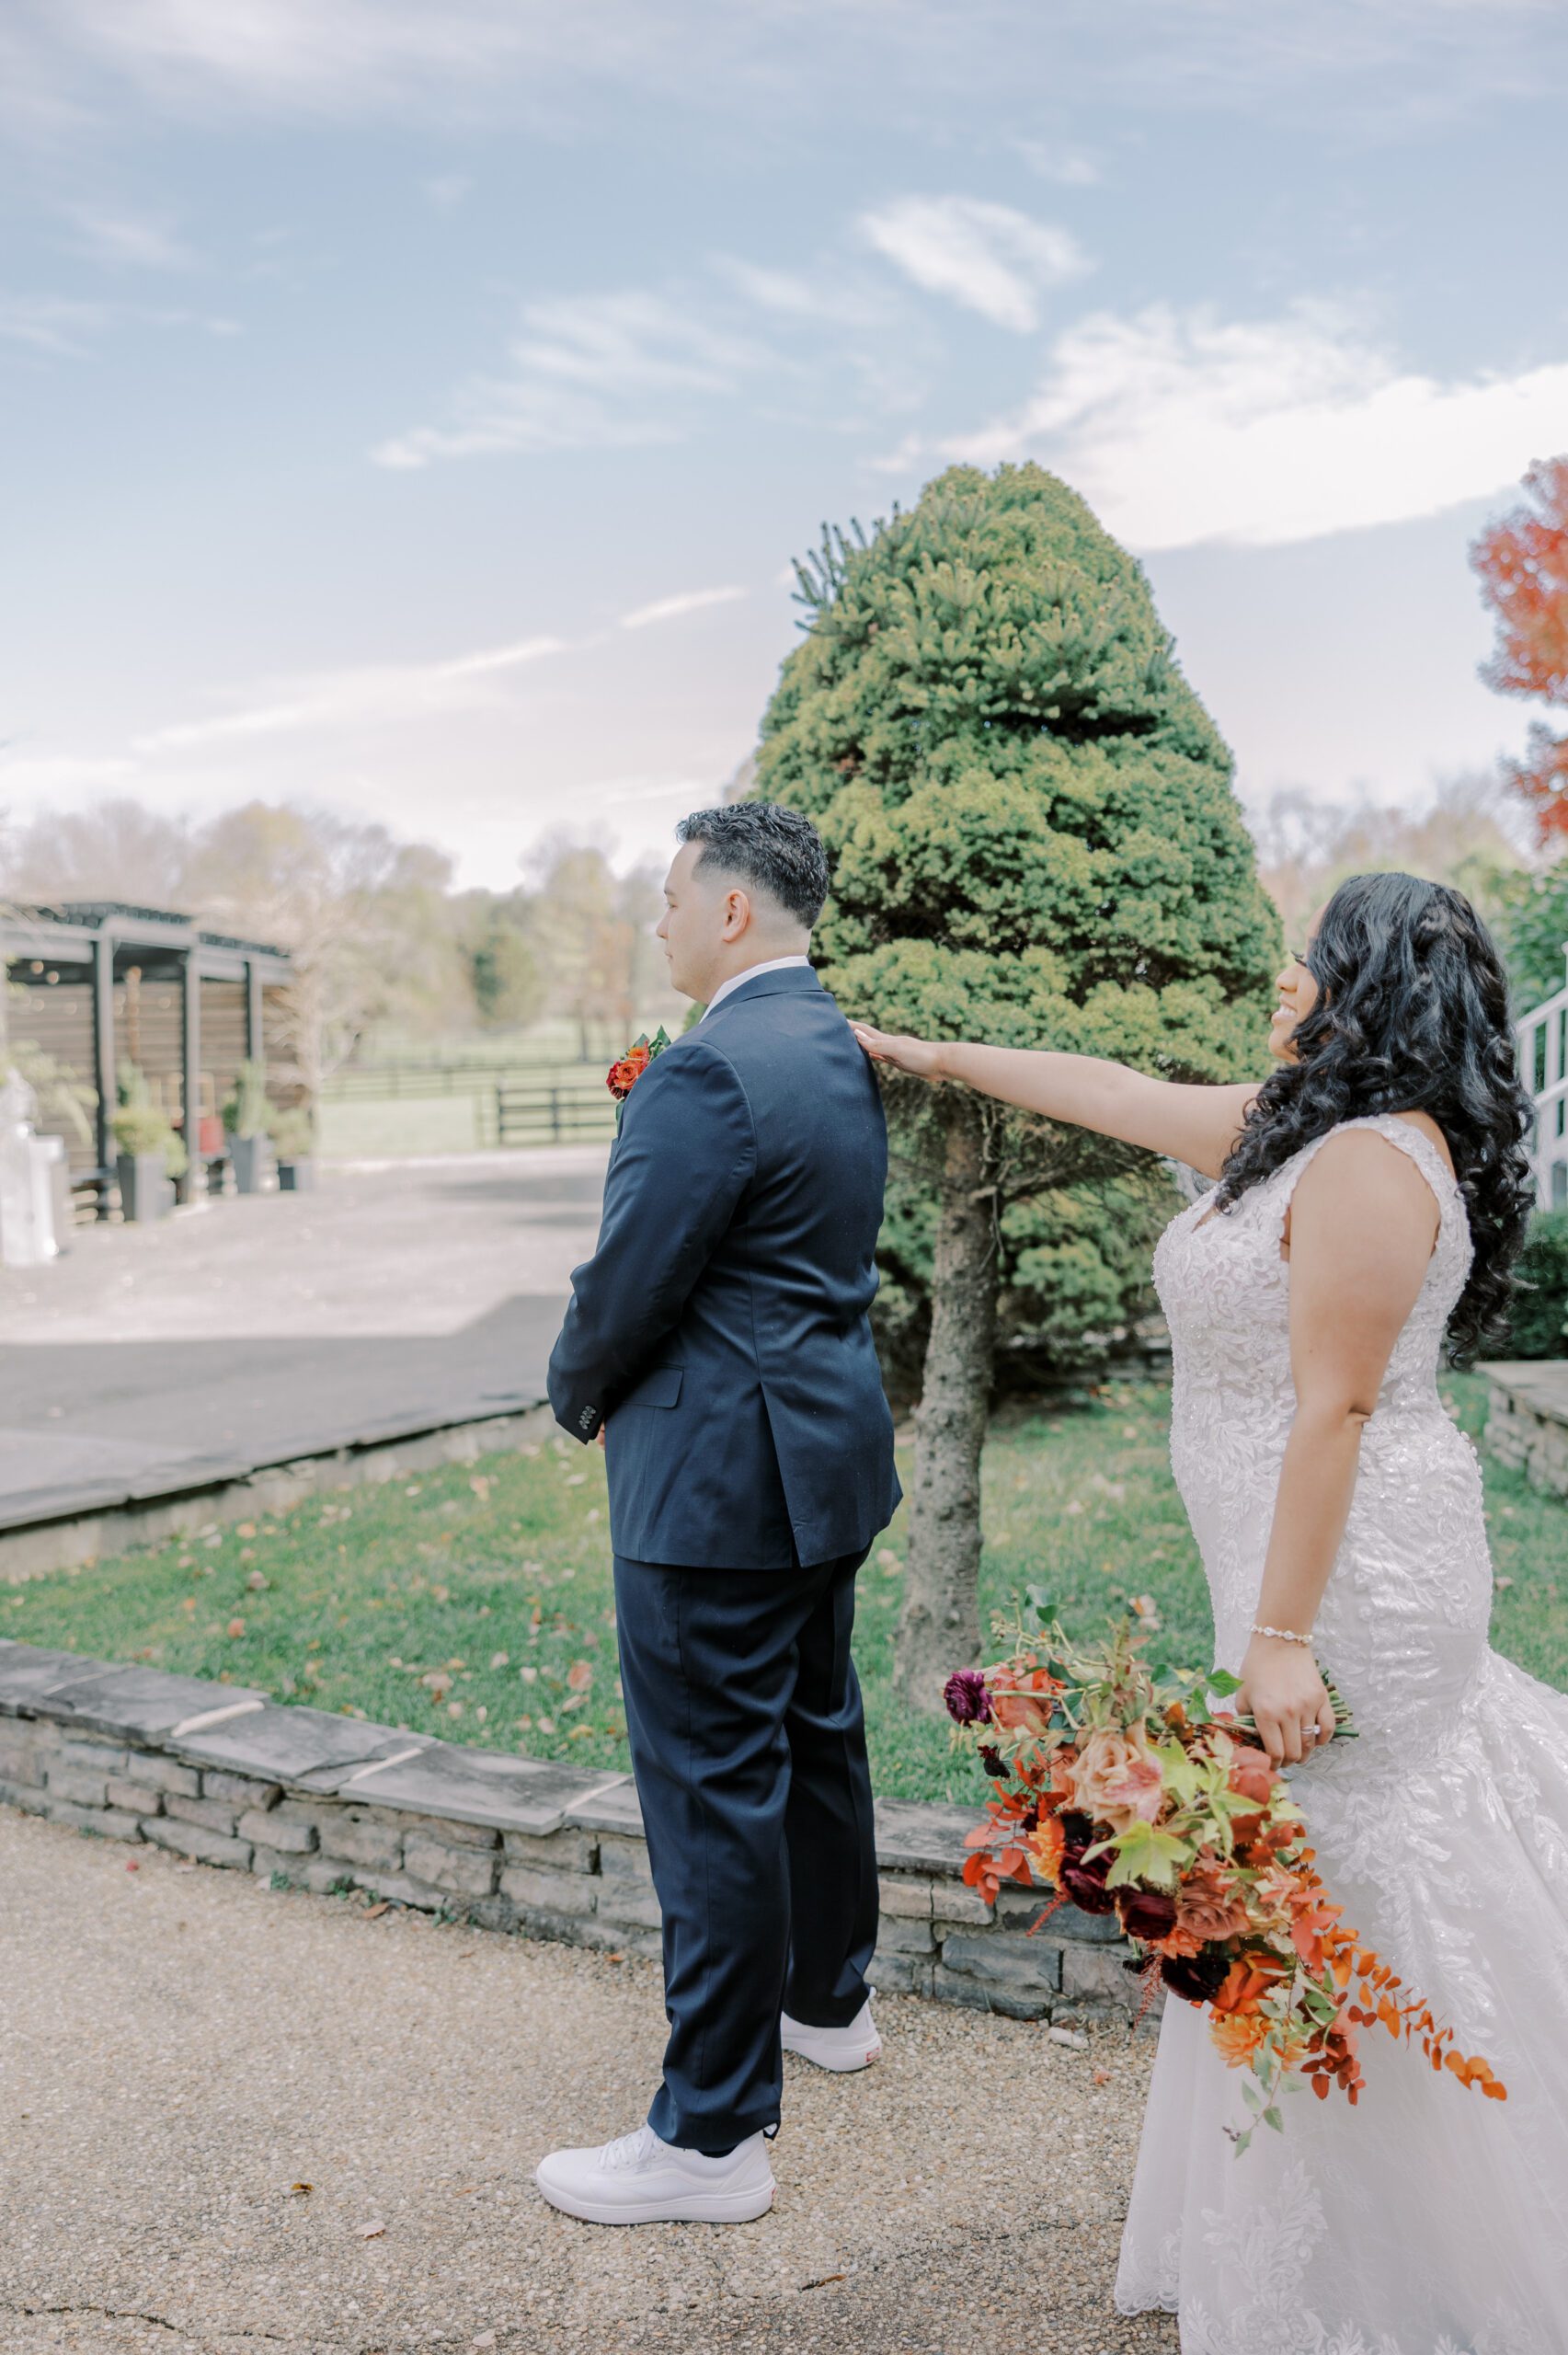 Bride outside tapping groom on shoulder while she holds her bouquet of orange, burgundy and red colored flowers